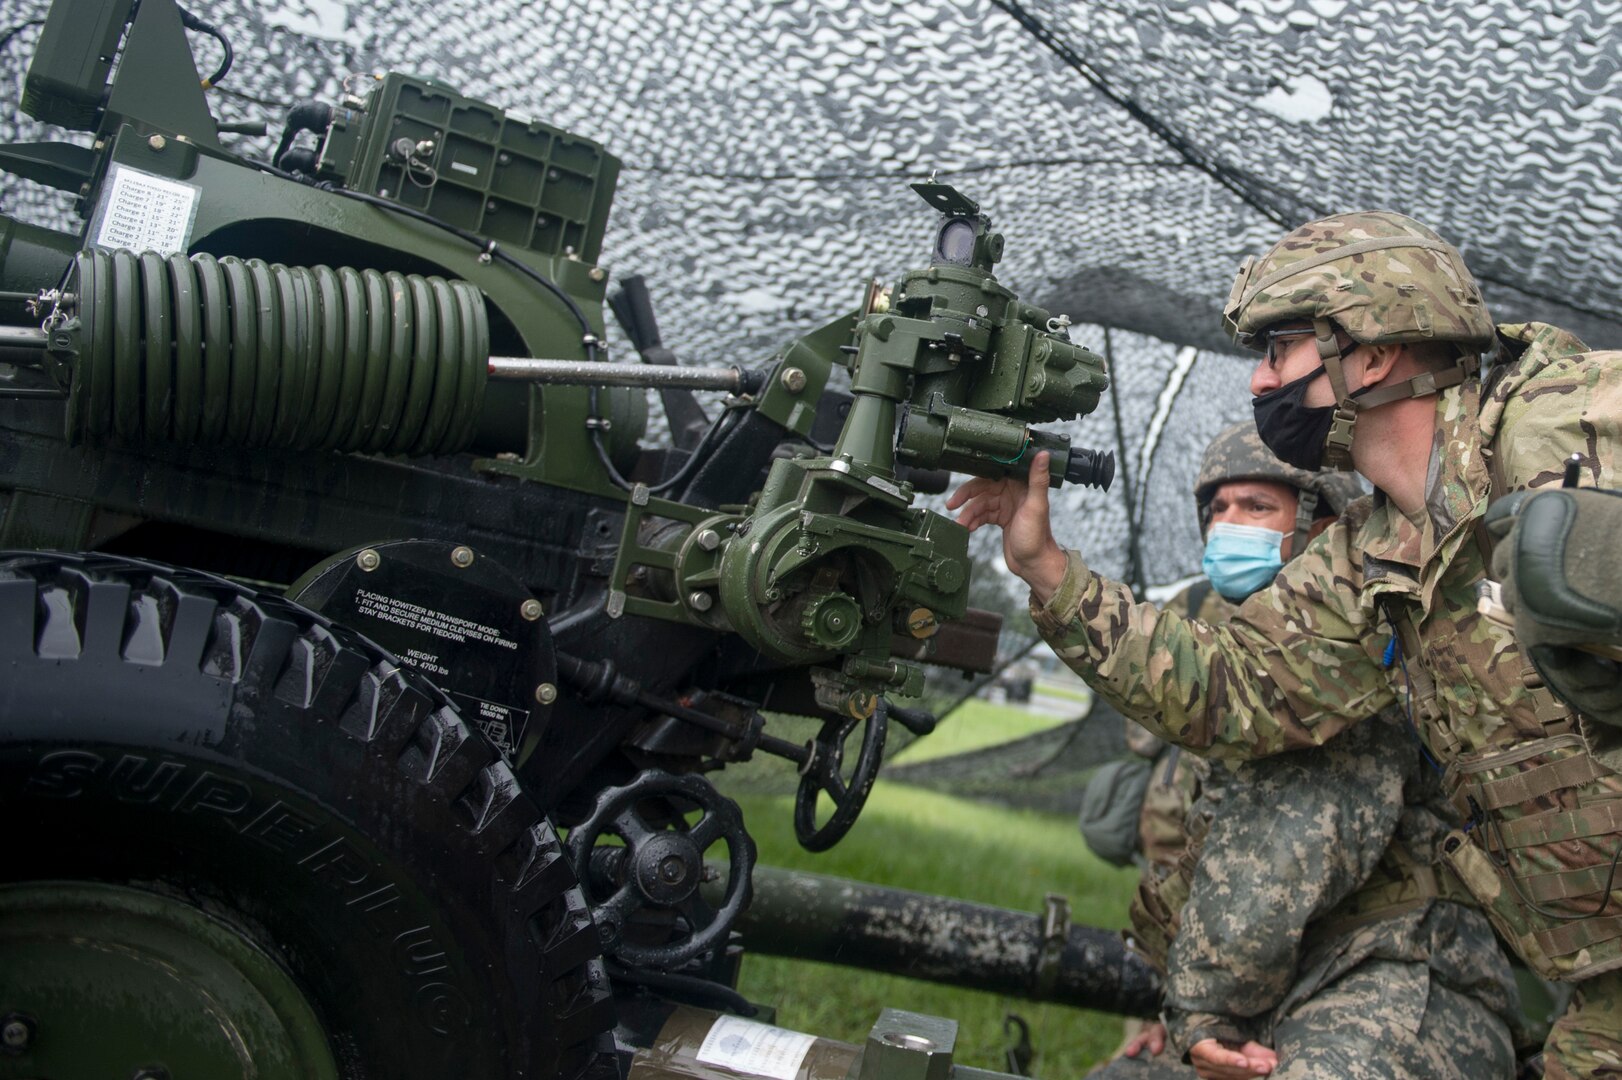 Soldiers from Battery B, 1st Battalion, 160th Field Artillery Regiment, 45th Infantry Brigade Combat Team, conduct crew drills with a 105mm Howitzer at their home armory in Holdenville, Oklahoma, July 29, 2020. The Soldiers, along with other units of the 45th IBCT, are taking part in home-station annual training with limited field training exercises while implementing COVID-19 counter measures like social distancing or wearing masks when social distancing is not possible - such as during crew drills. (Oklahoma Army National Guard photo by Sgt. Anthony Jones)